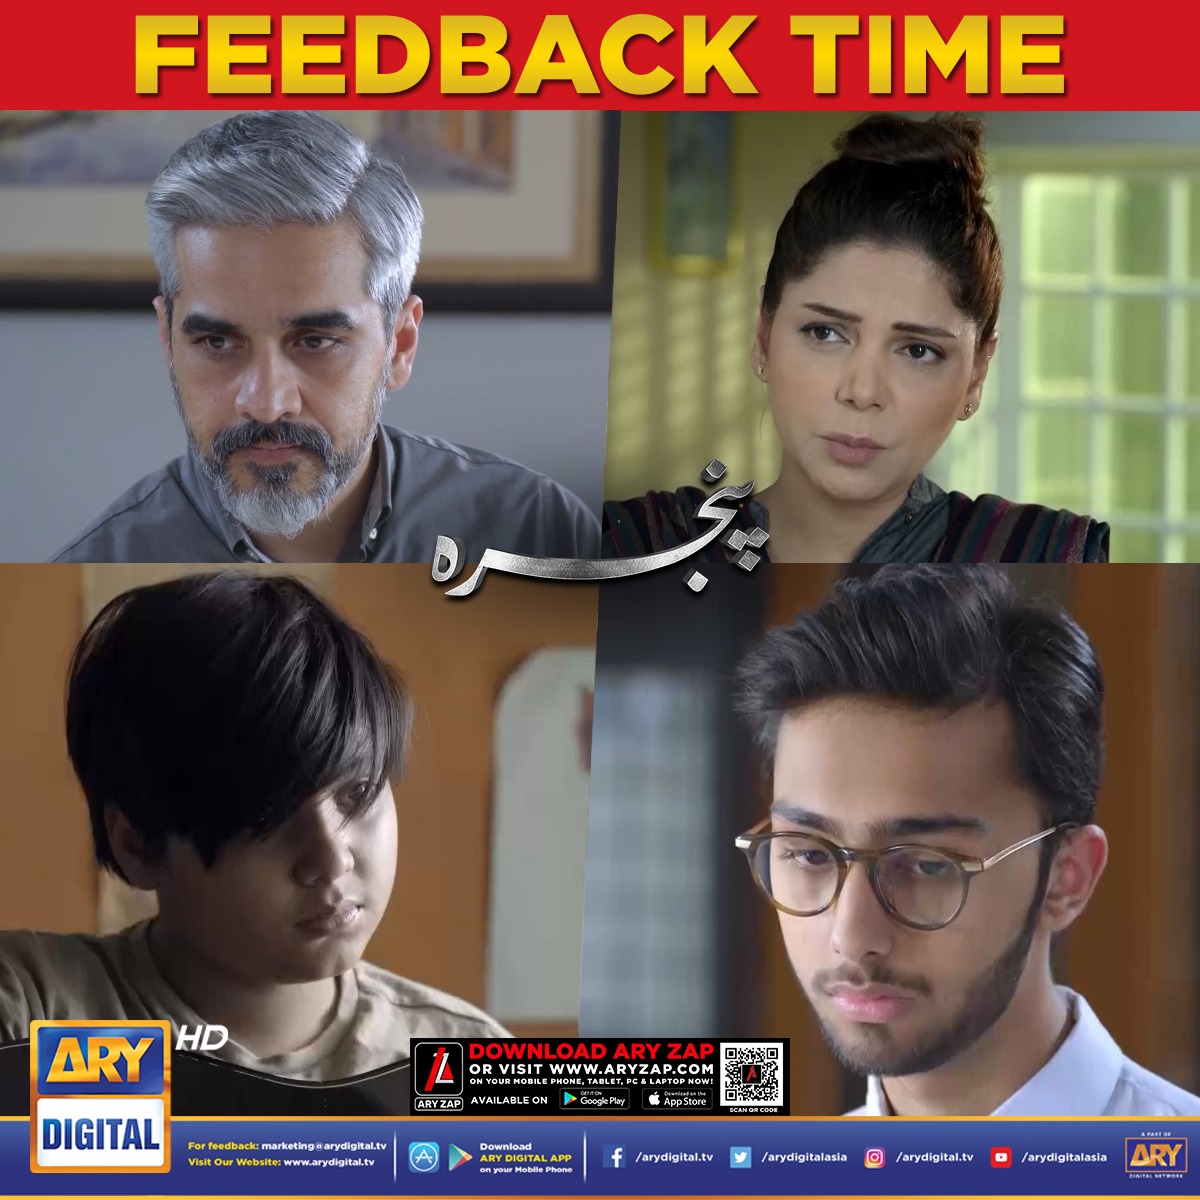 Tell us your feedback in the comments section below! #Pinjra airs every Thursday at 8:00 PM - only on #ARYDigital #ARYDrama #سمجھیں_اپنے_بچوں_کو #HadiqaKiani #OmairRana #AashirWajahat #AhmedUsman @Hadiqa_Kiani @omairana @Aashirwajahat1